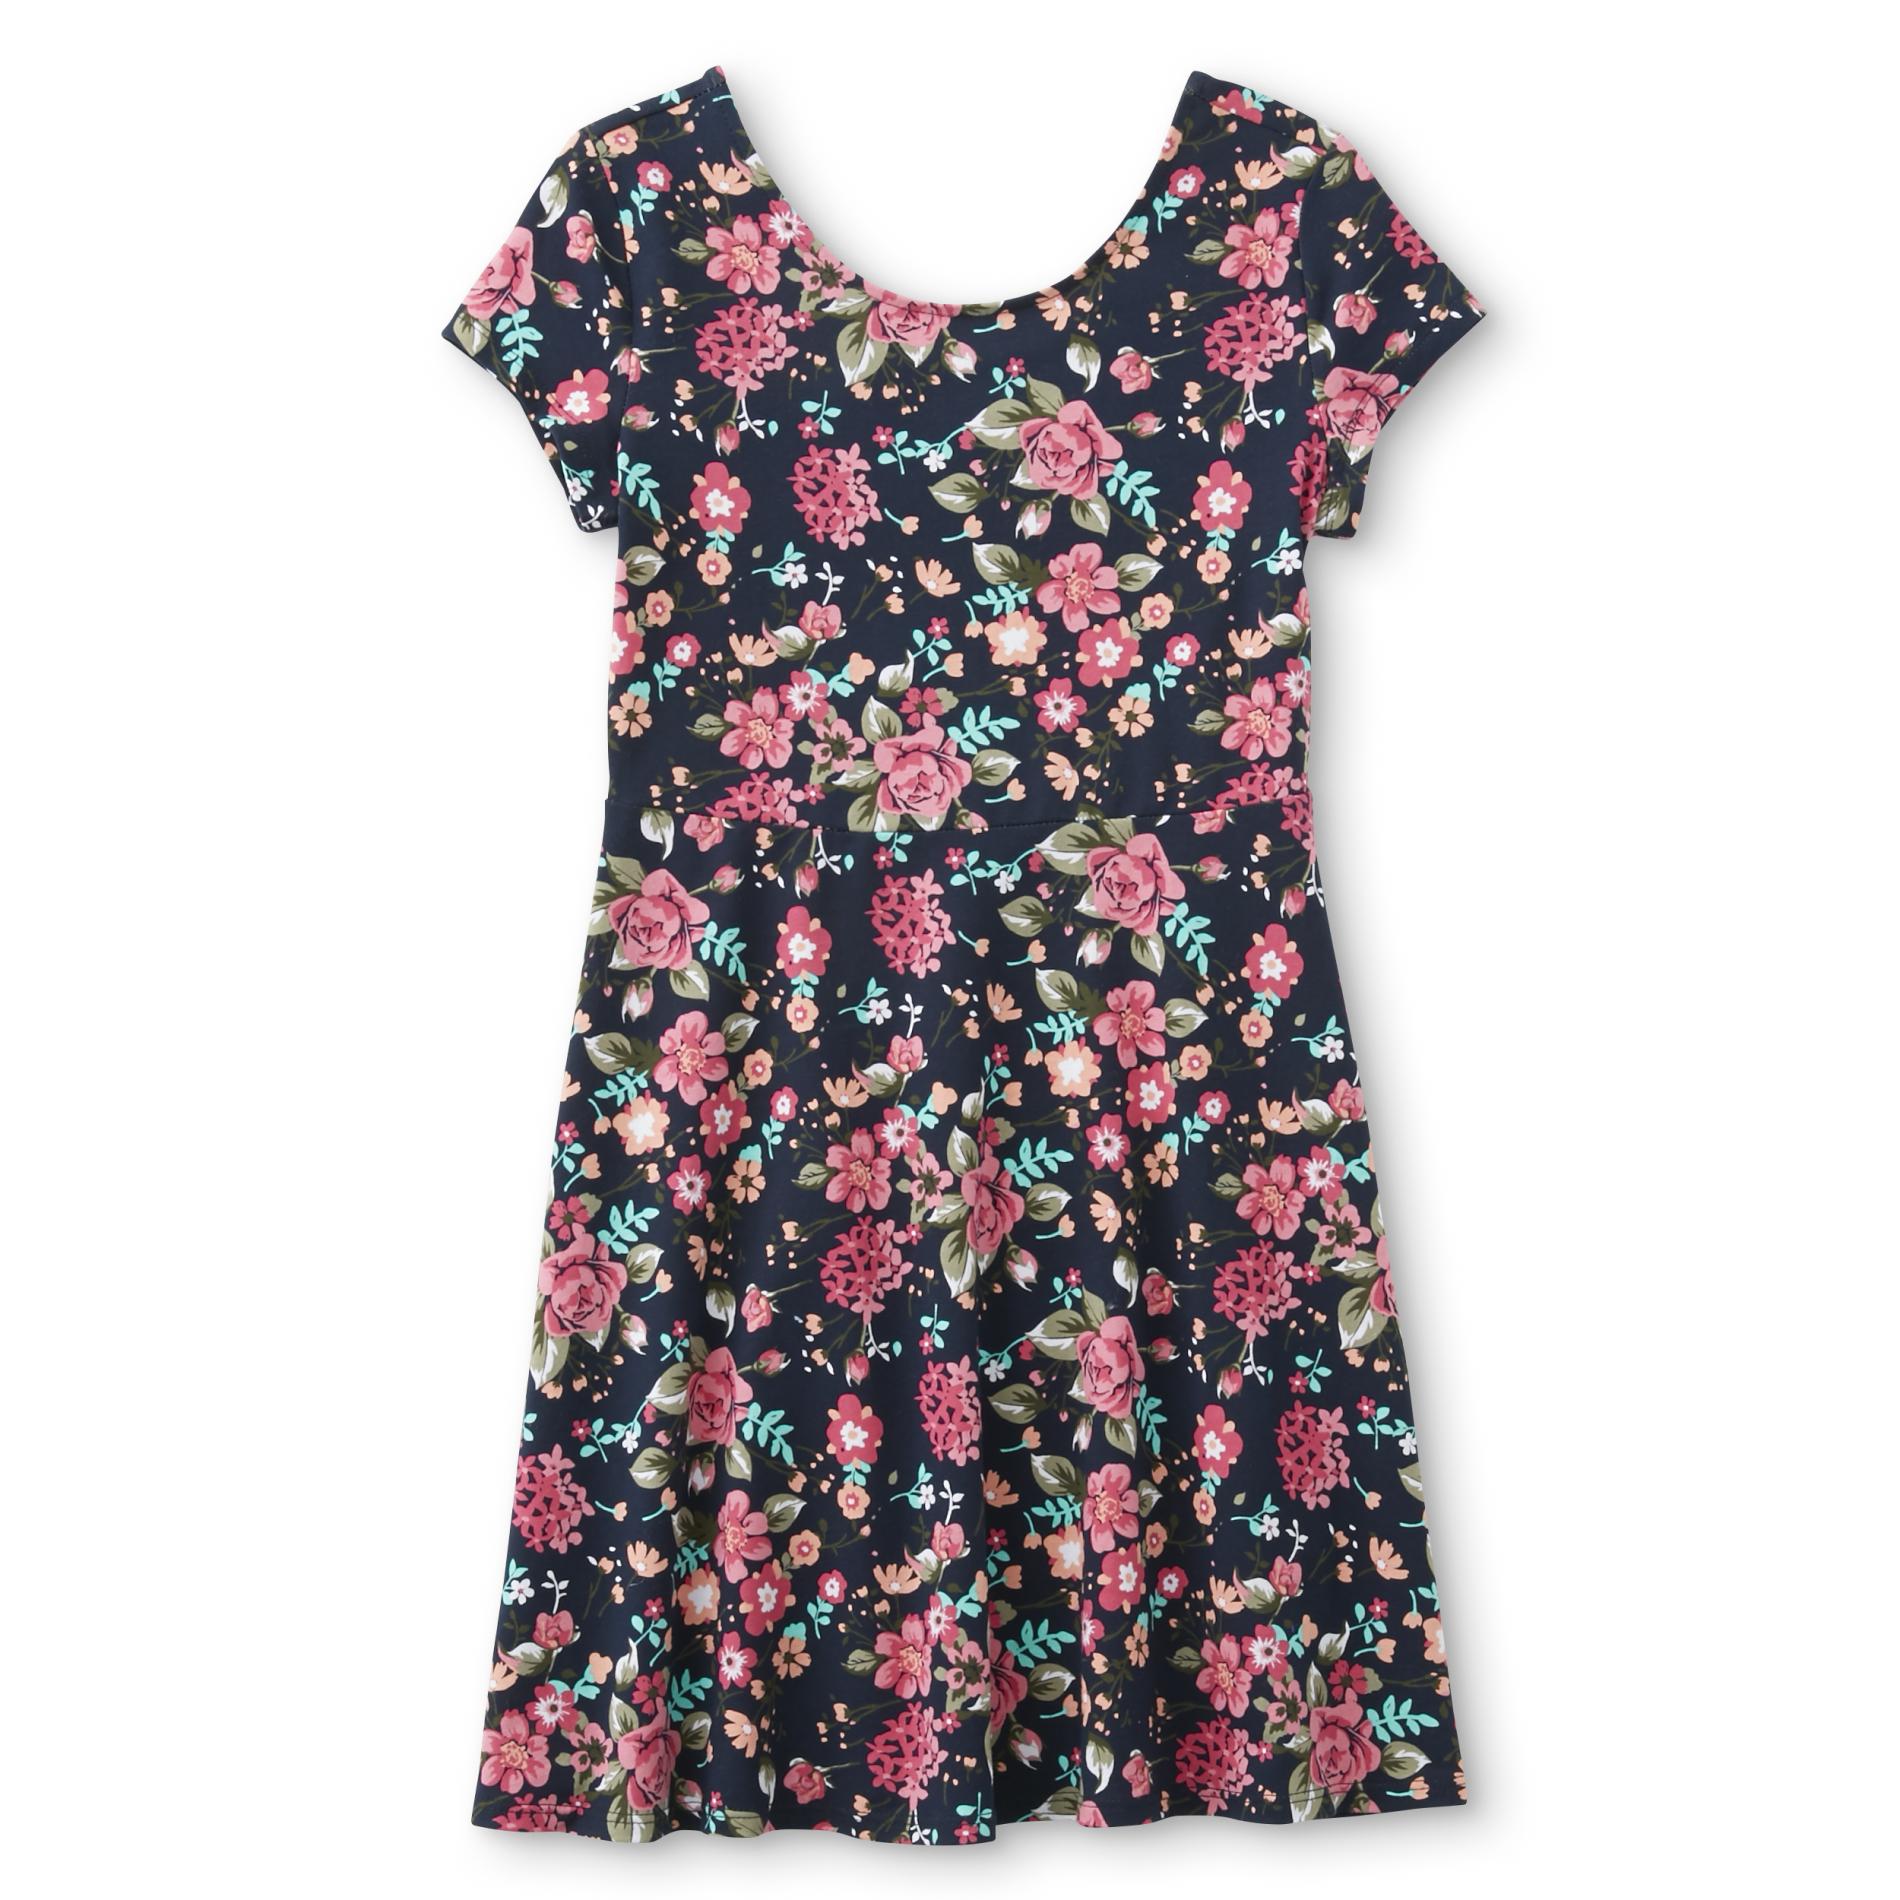 Simply Styled Girls' Skater Dress - Floral